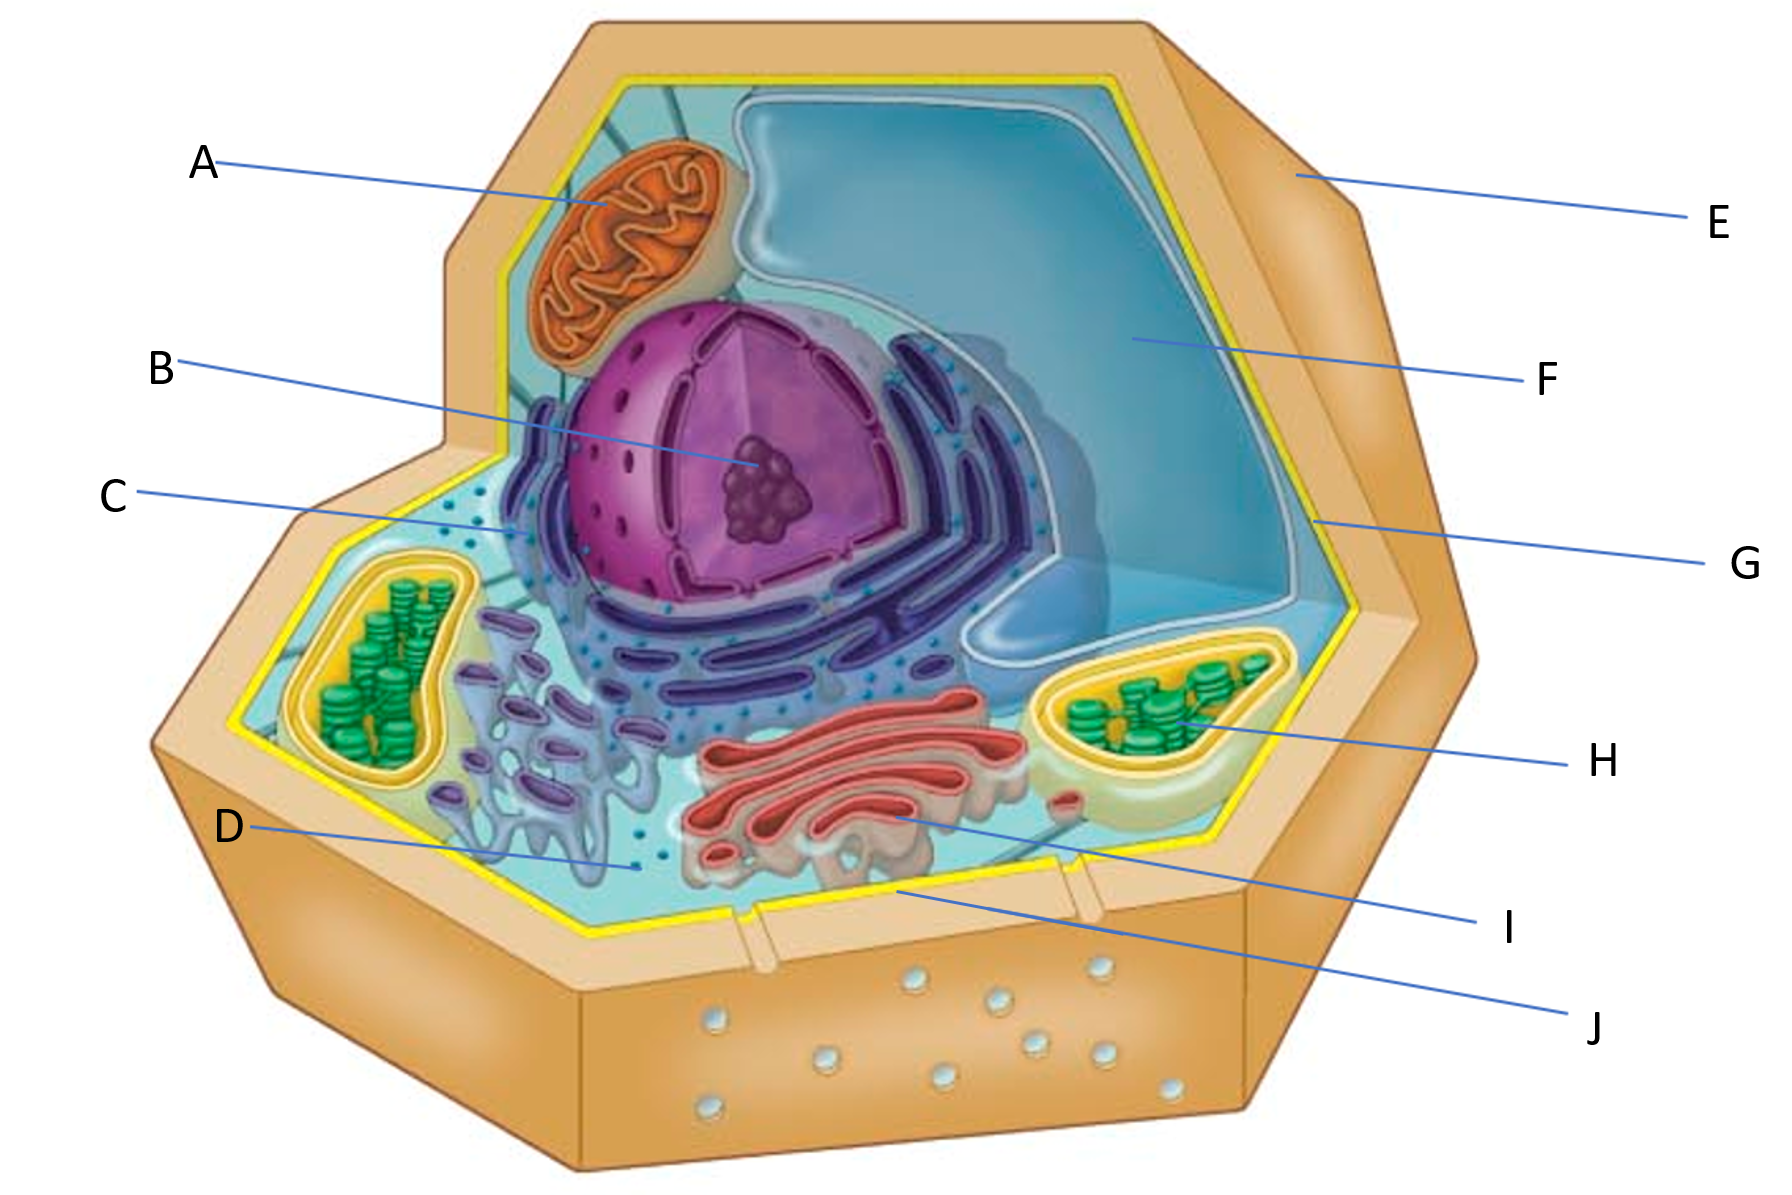 plant cell.PNG